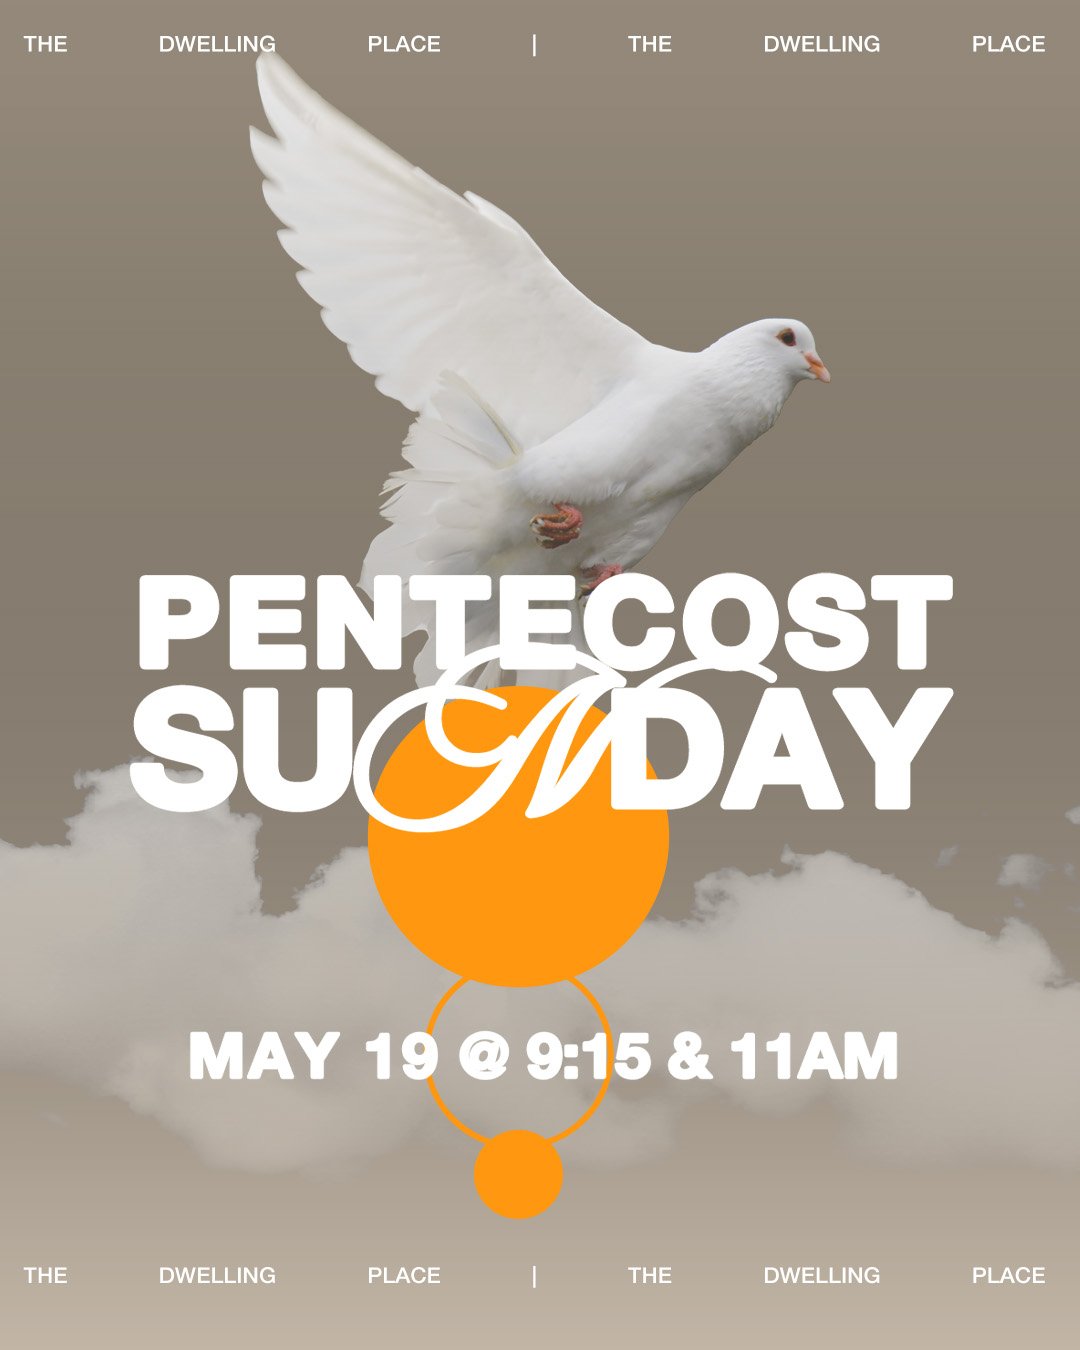 Join us this Sunday for Pentecost Sunday at New Life! When the day of Pentecost came, they were all together in one place. Suddenly a sound like the blowing of a violent wind came from heaven and filled the whole house where they were sitting. They s